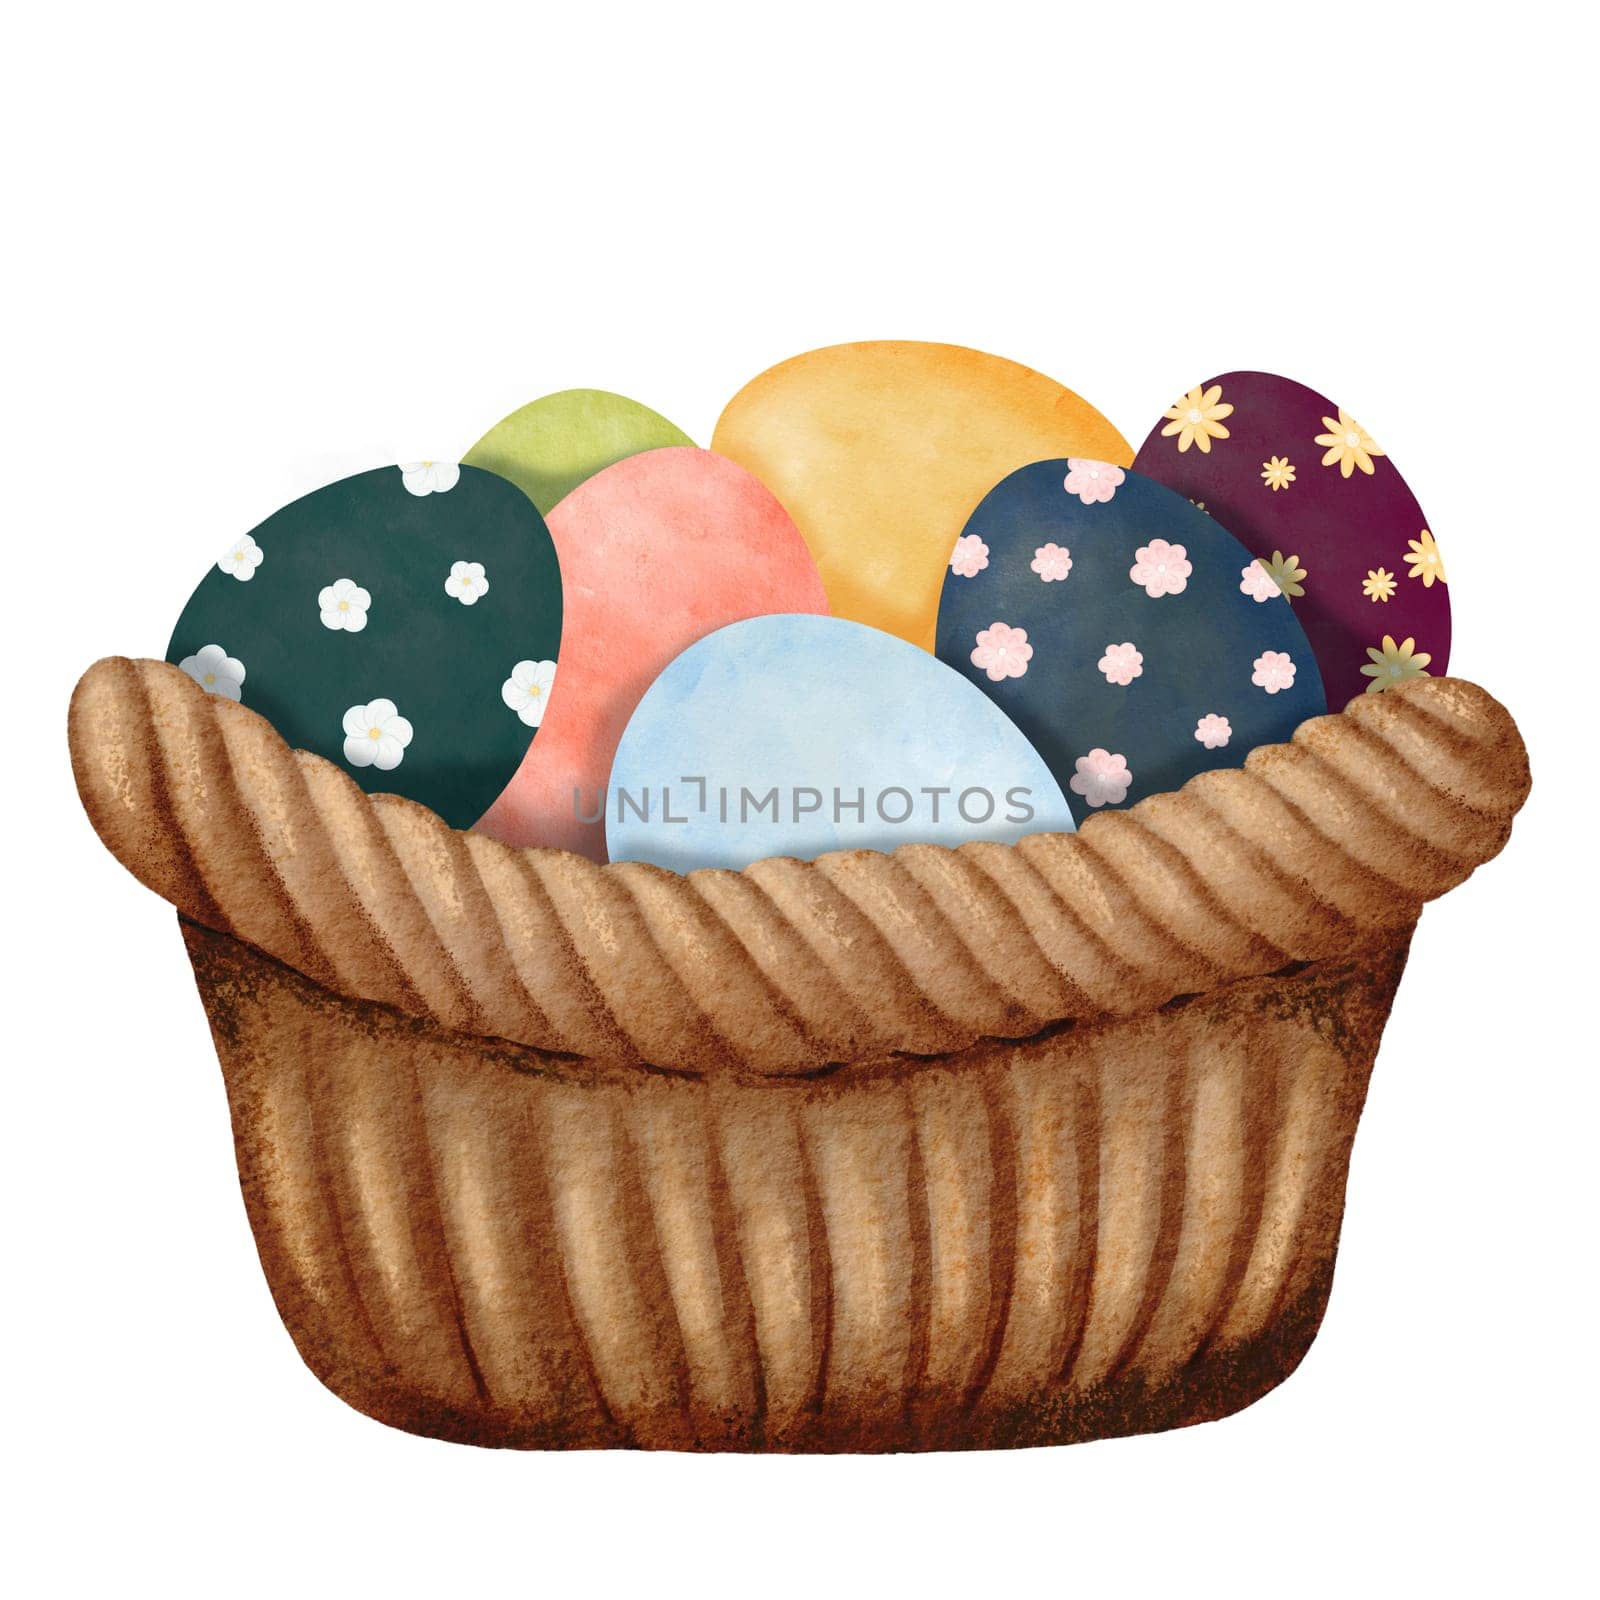 Woven basket filled with colorful Easter eggs. Eggs of various hues adorned with floral decorations. Watercolor illustration capturing the festive spirit, ideal for conveying the joy of Easter.